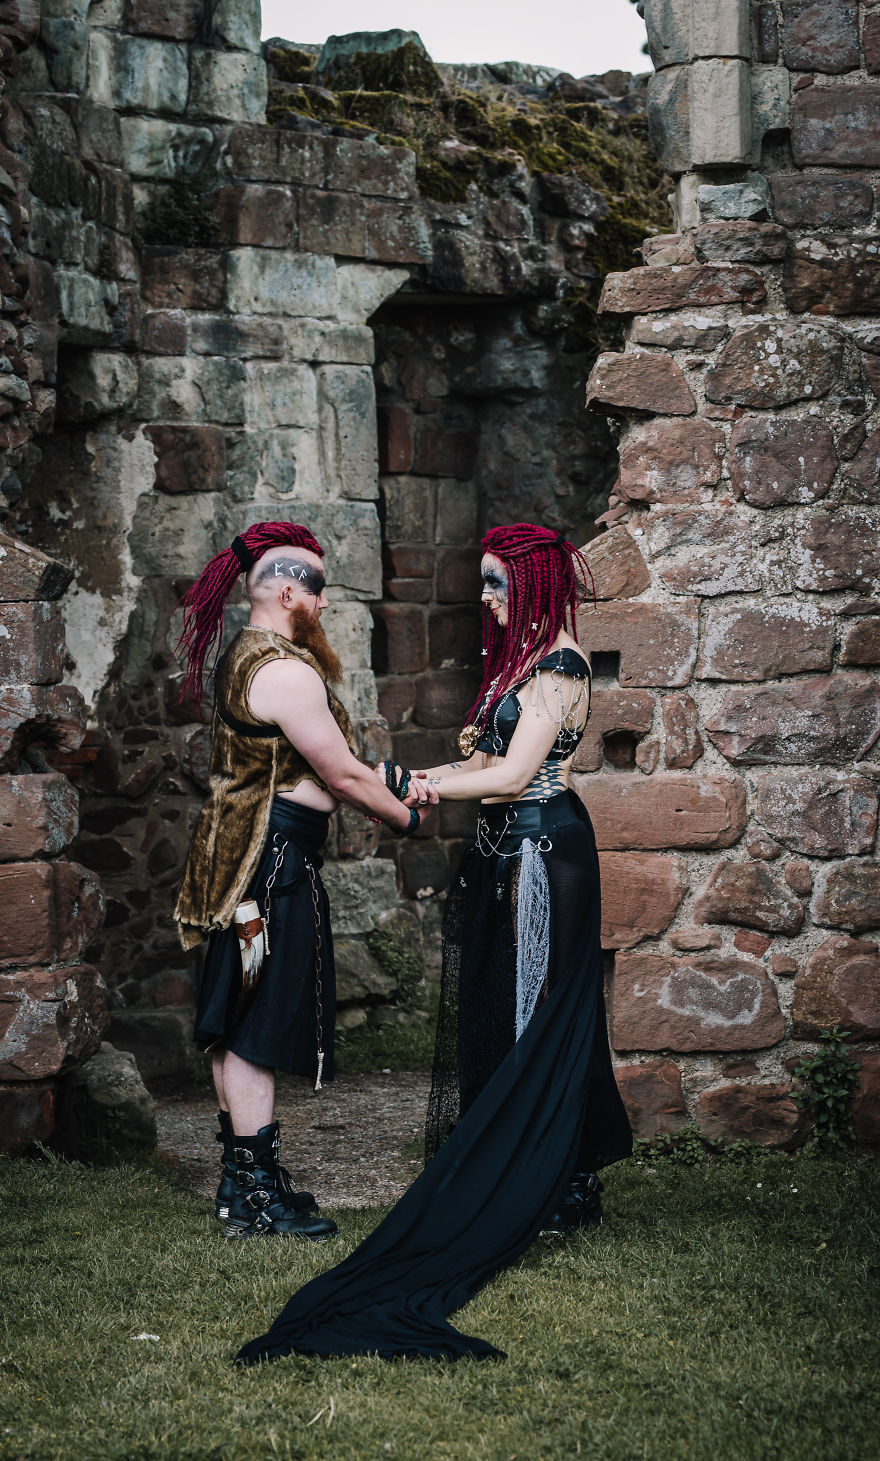 We Recreated Their Wedding Day As Post-Apocalyptic Vikings